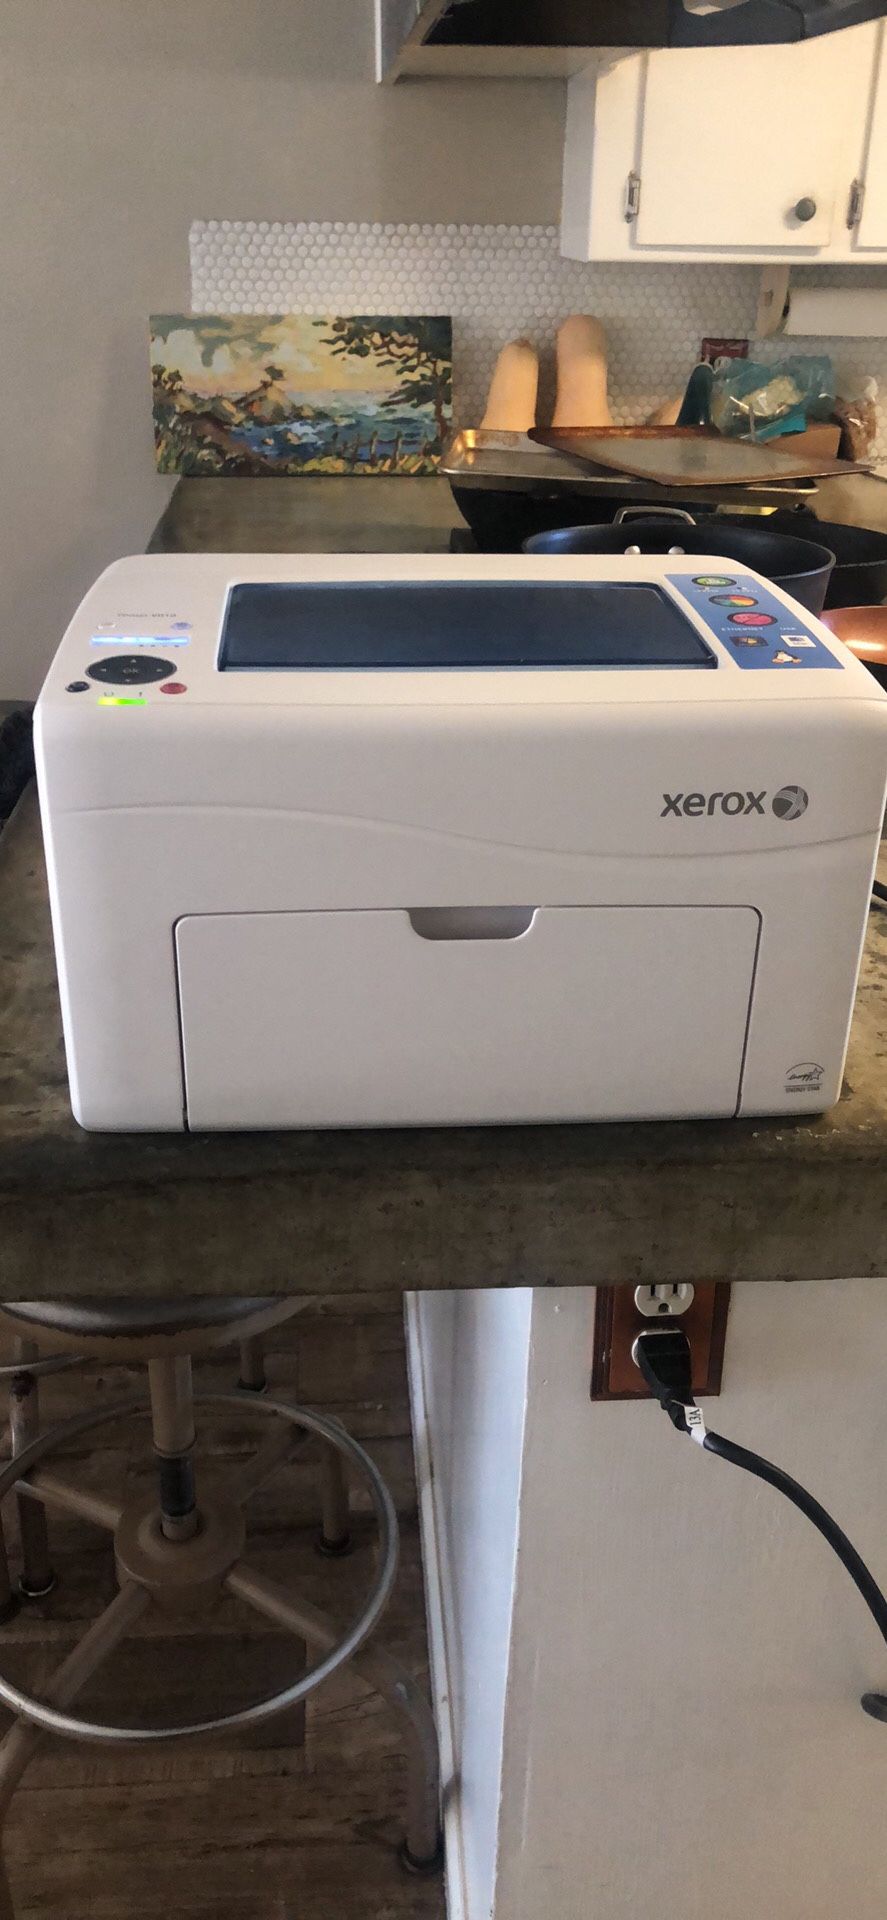 Xerox Phaser 6010 Color Laser Printer with four ink cartridges